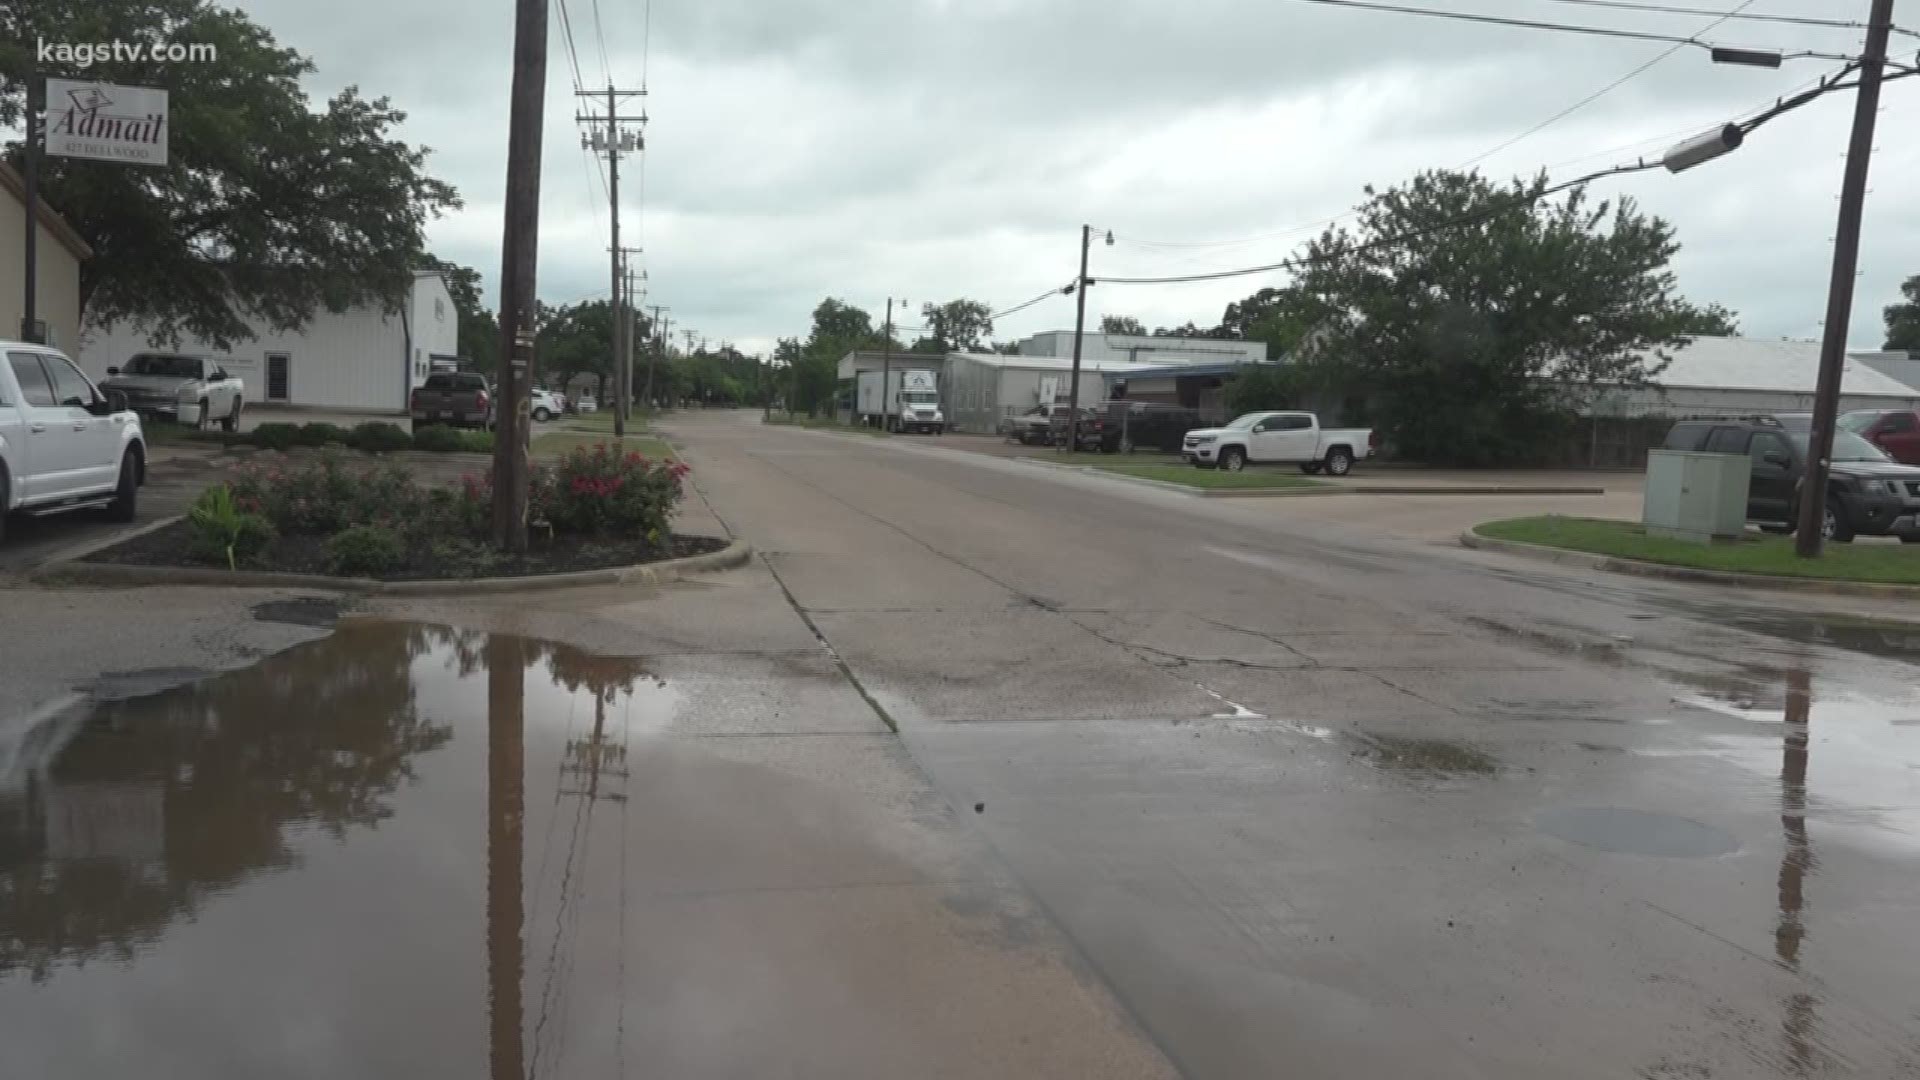 Most people know the 'turn around don't drown' rule, but what about those deeper "puddles" that we think we can get away with driving over? A local body shop says you might want to think again.